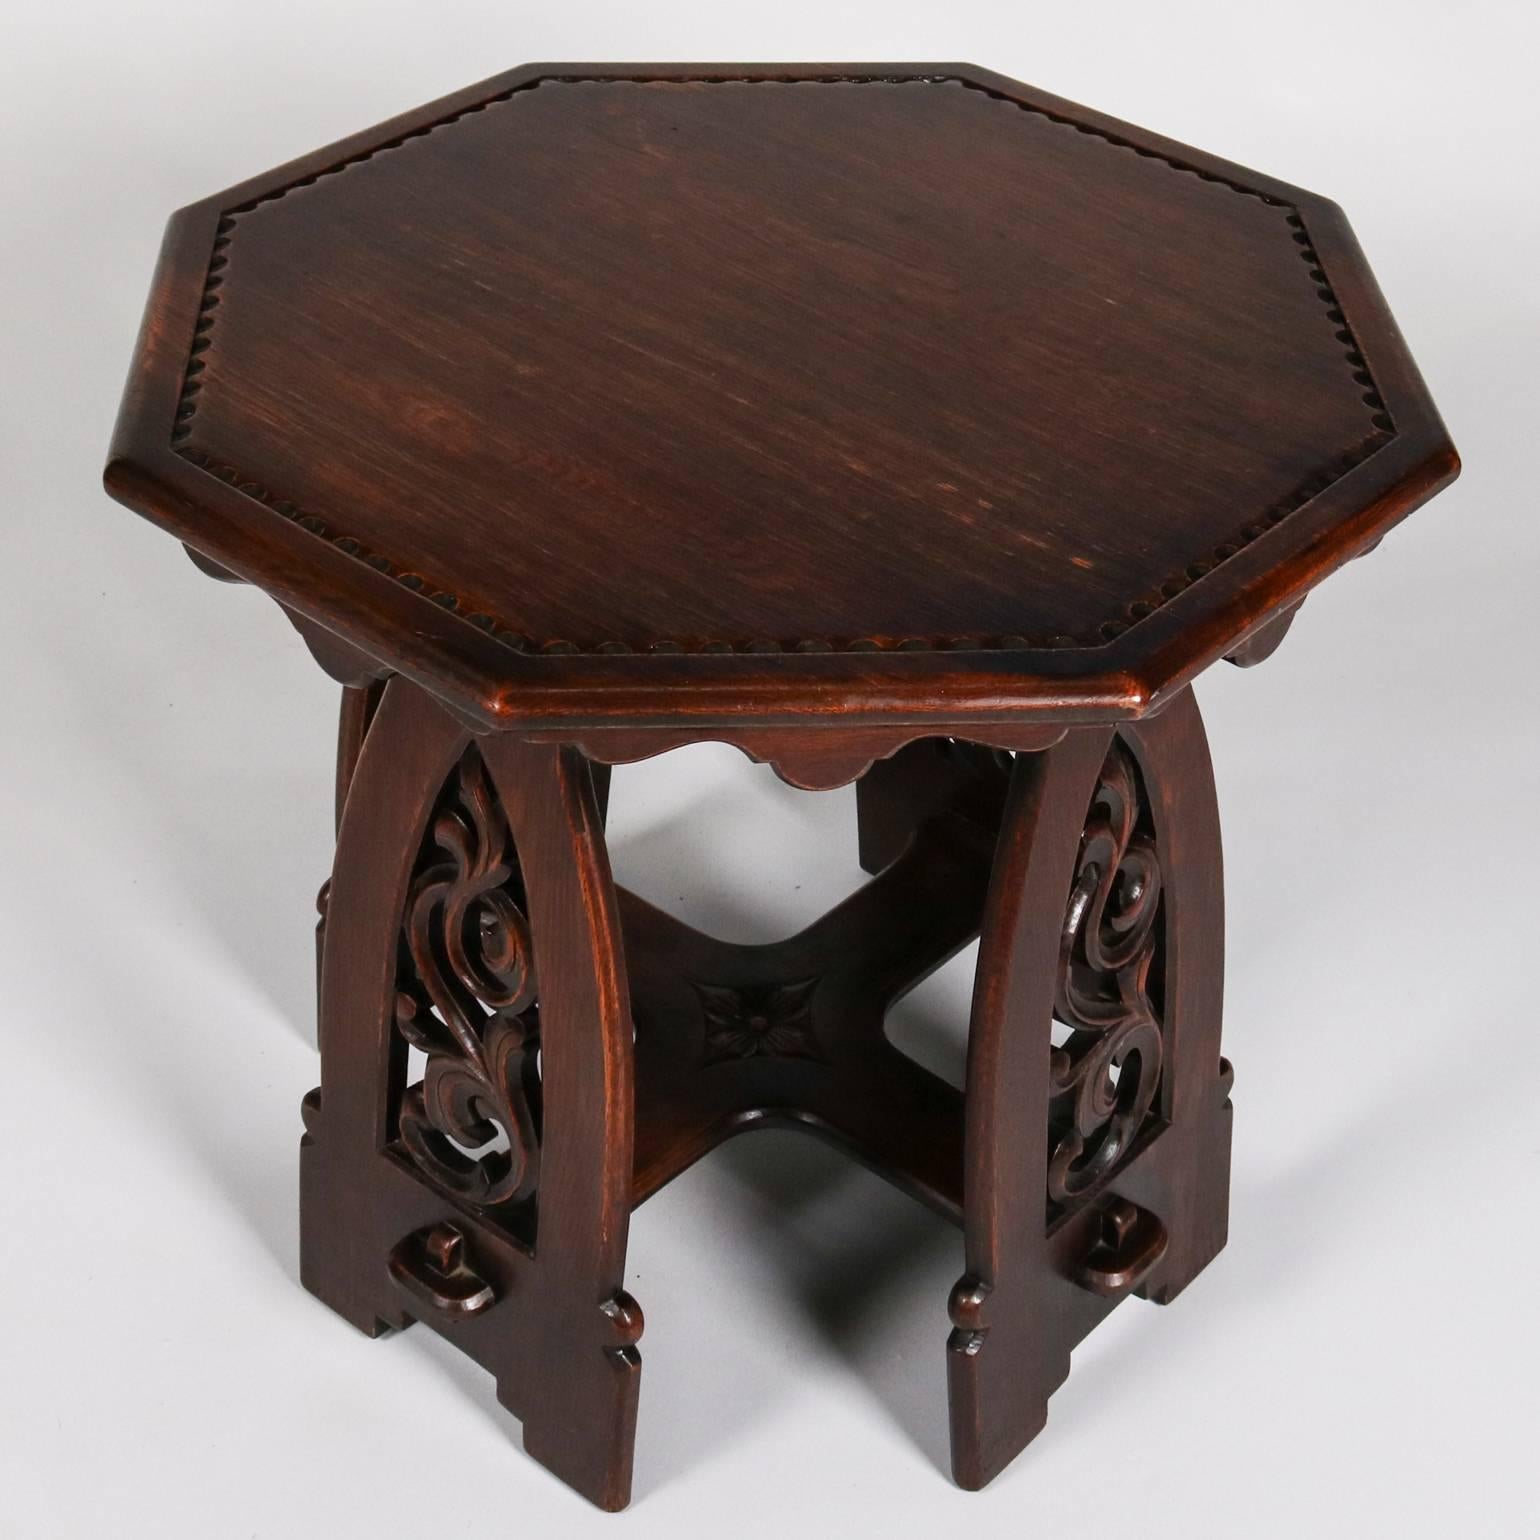 Antique Arts & Crafts movement Mission oak Rose Valley School taboret stand or table features carved pierced foliate trestle legs in Gothic arch form with morticed stretchers and octagonal carved beaded top with scalloped apron, circa